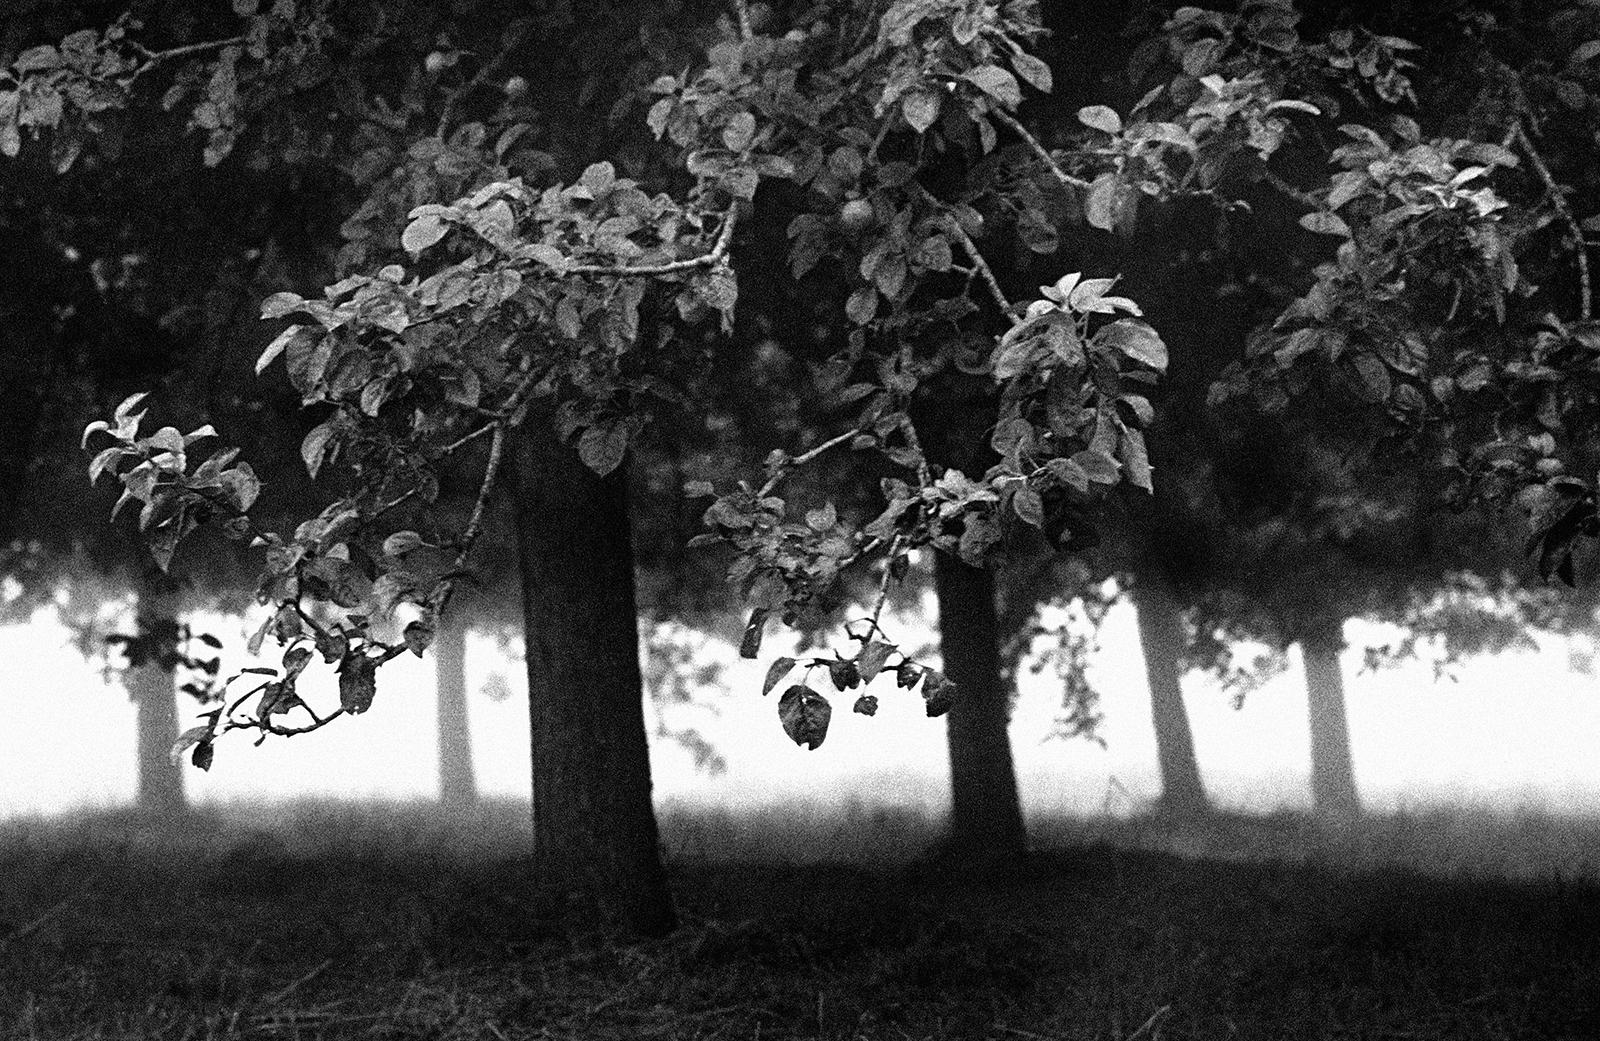 Orchard - Signed limited edition fine art print, Black white photo, Landscape - Photograph by Ian Sanderson